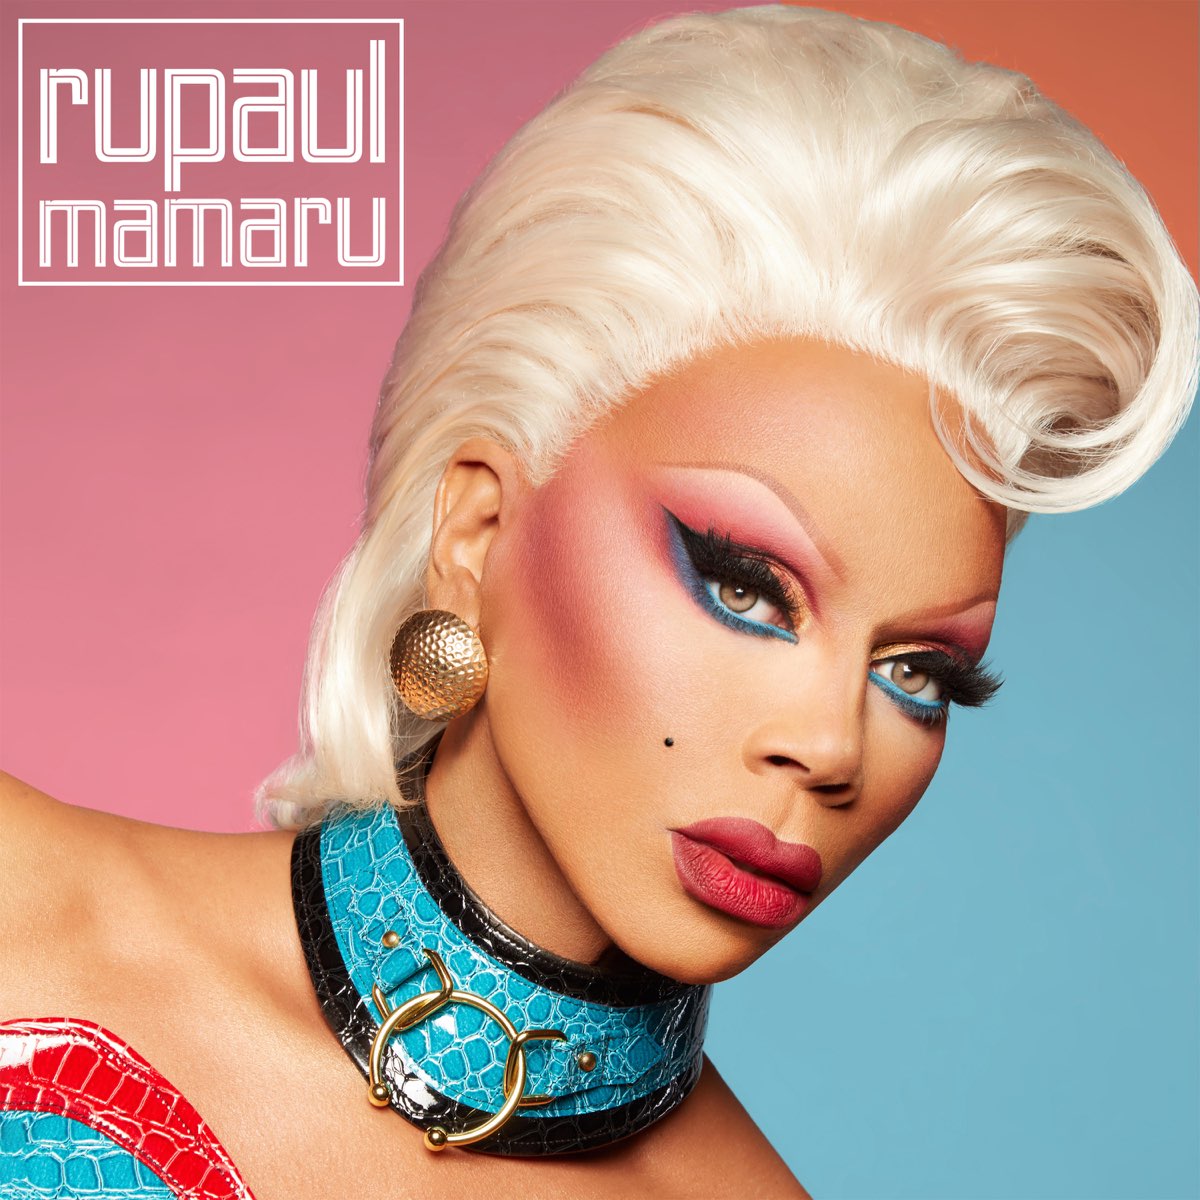 undskyld niveau Investere MAMARU by RuPaul on Apple Music